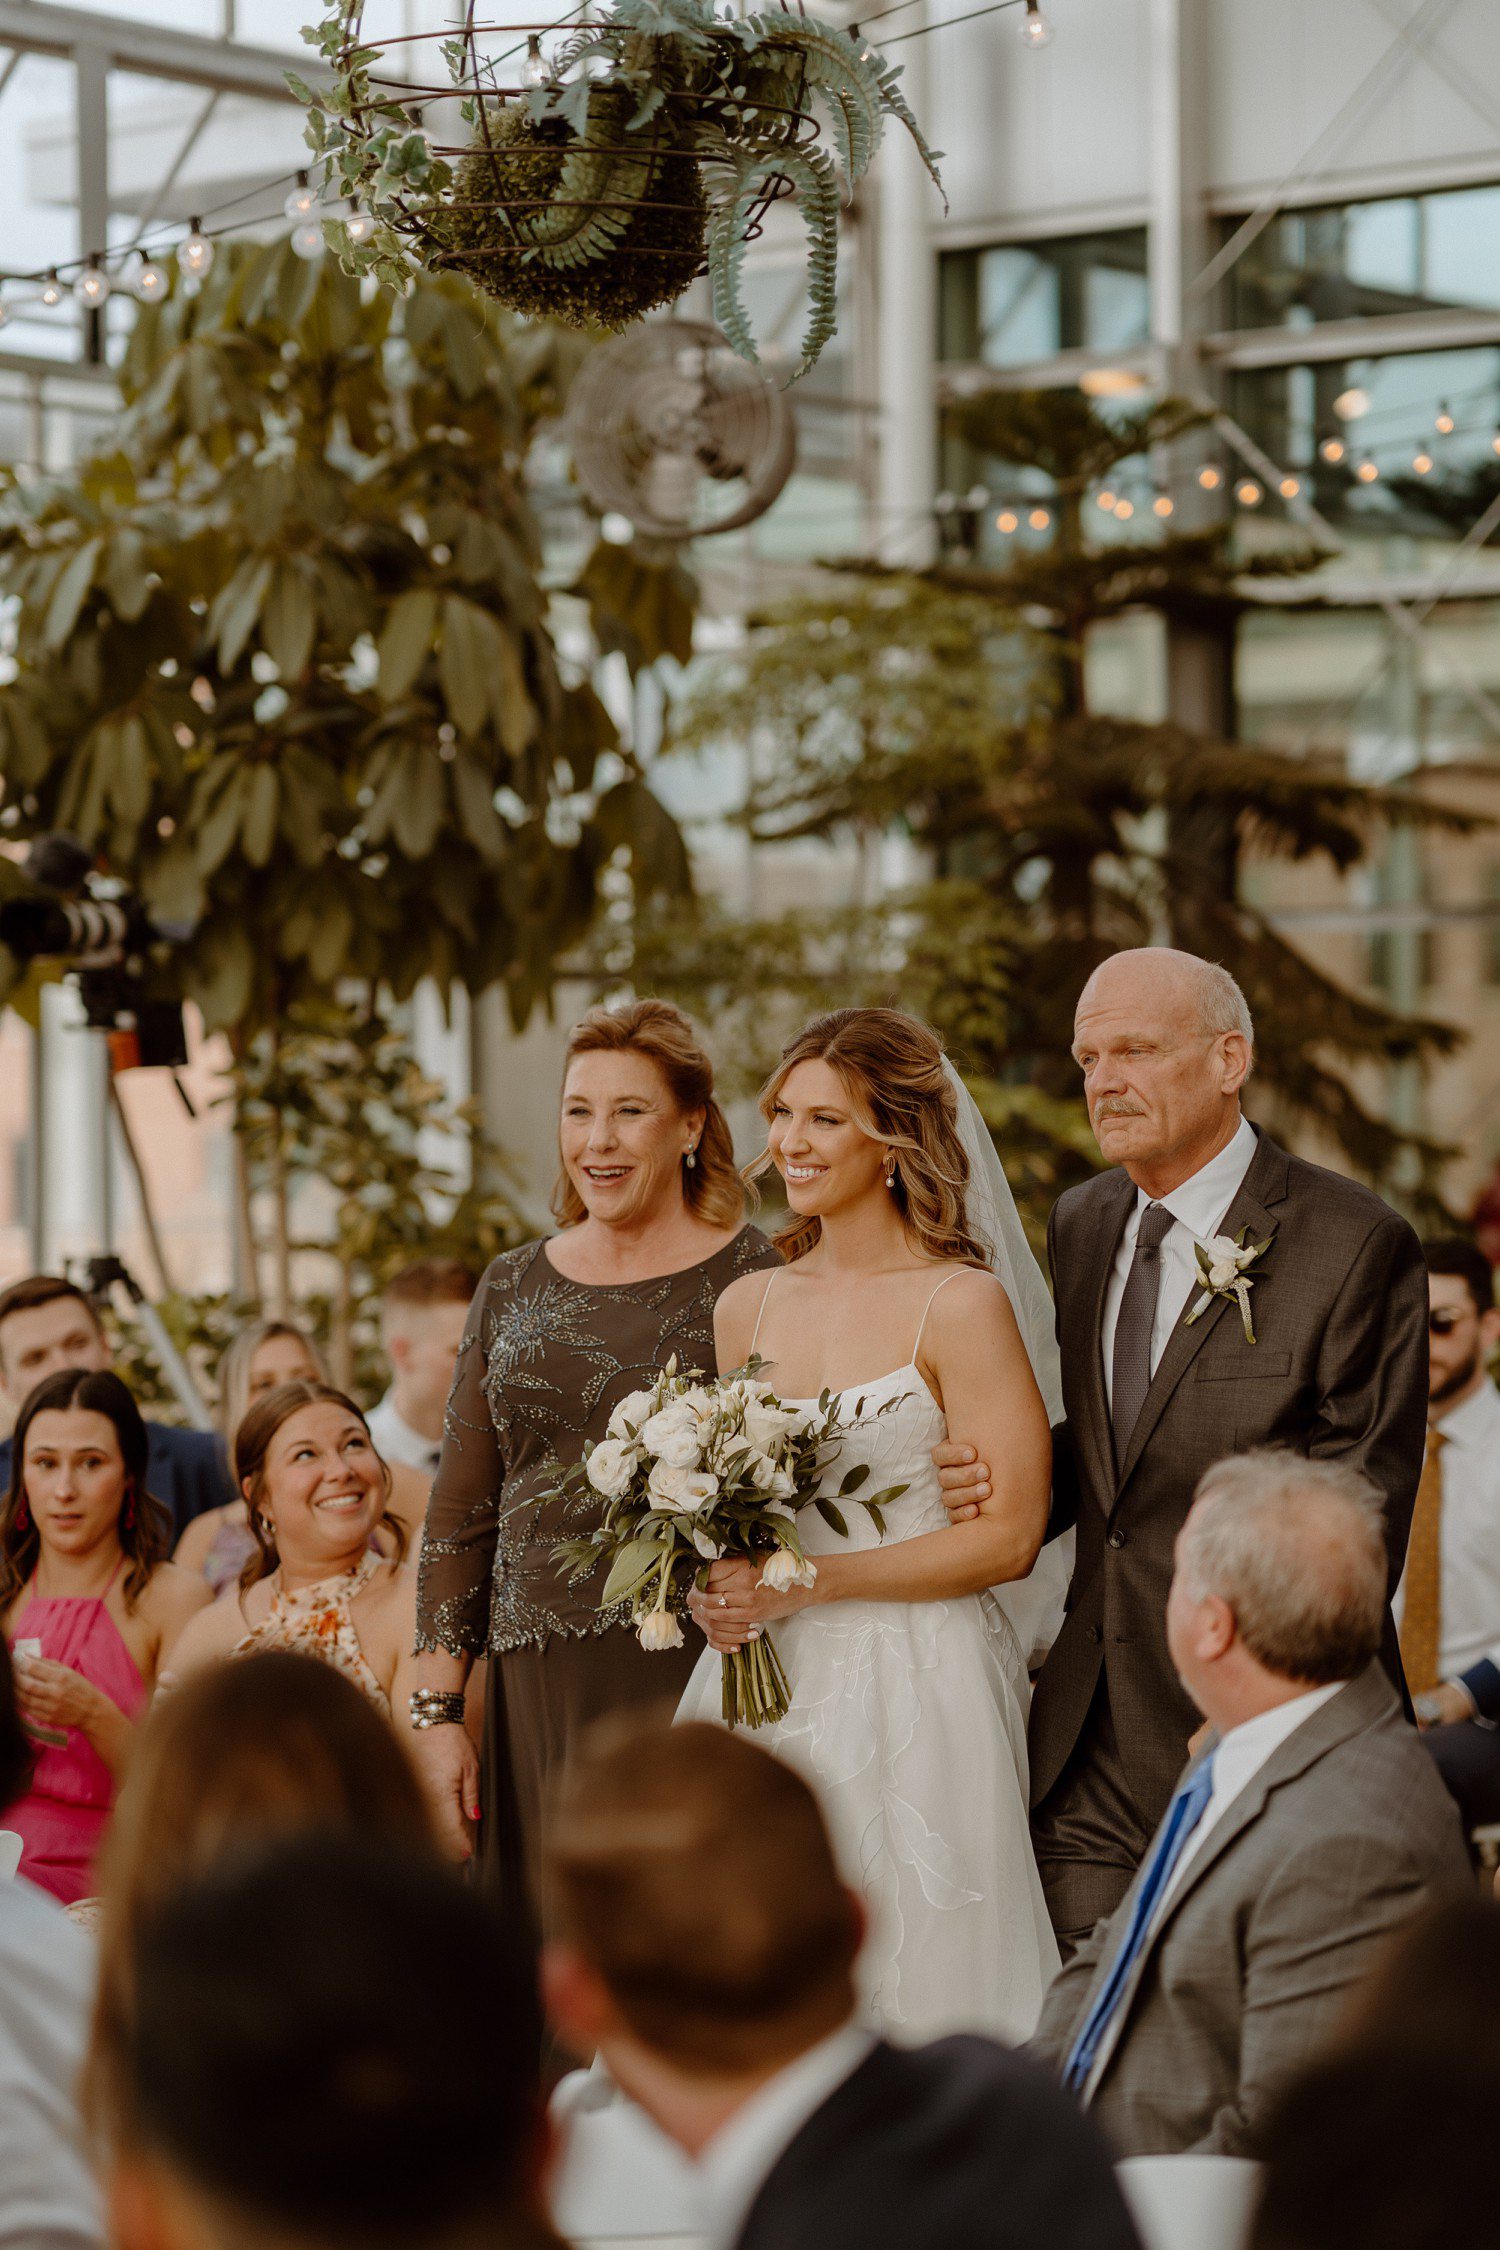 Wedding Ceremony at Downtown Market Grand Rapids